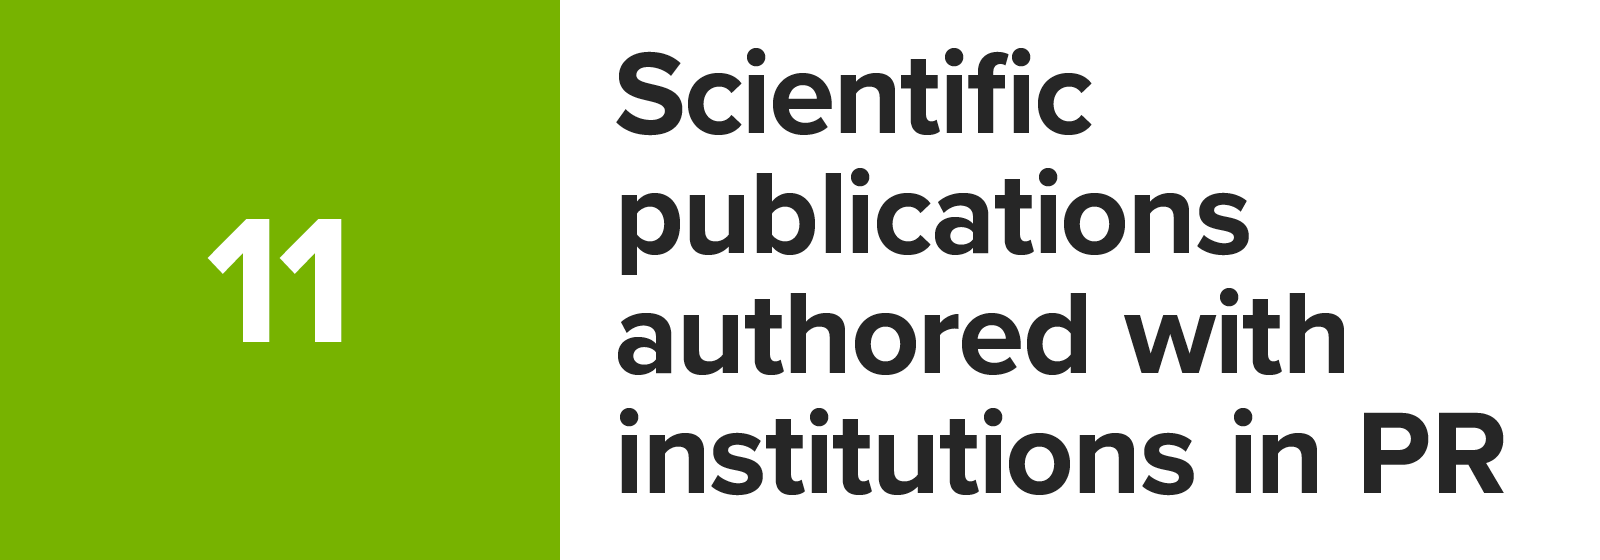 Number graphic scientific publications authored with institutions in Puerto Rico